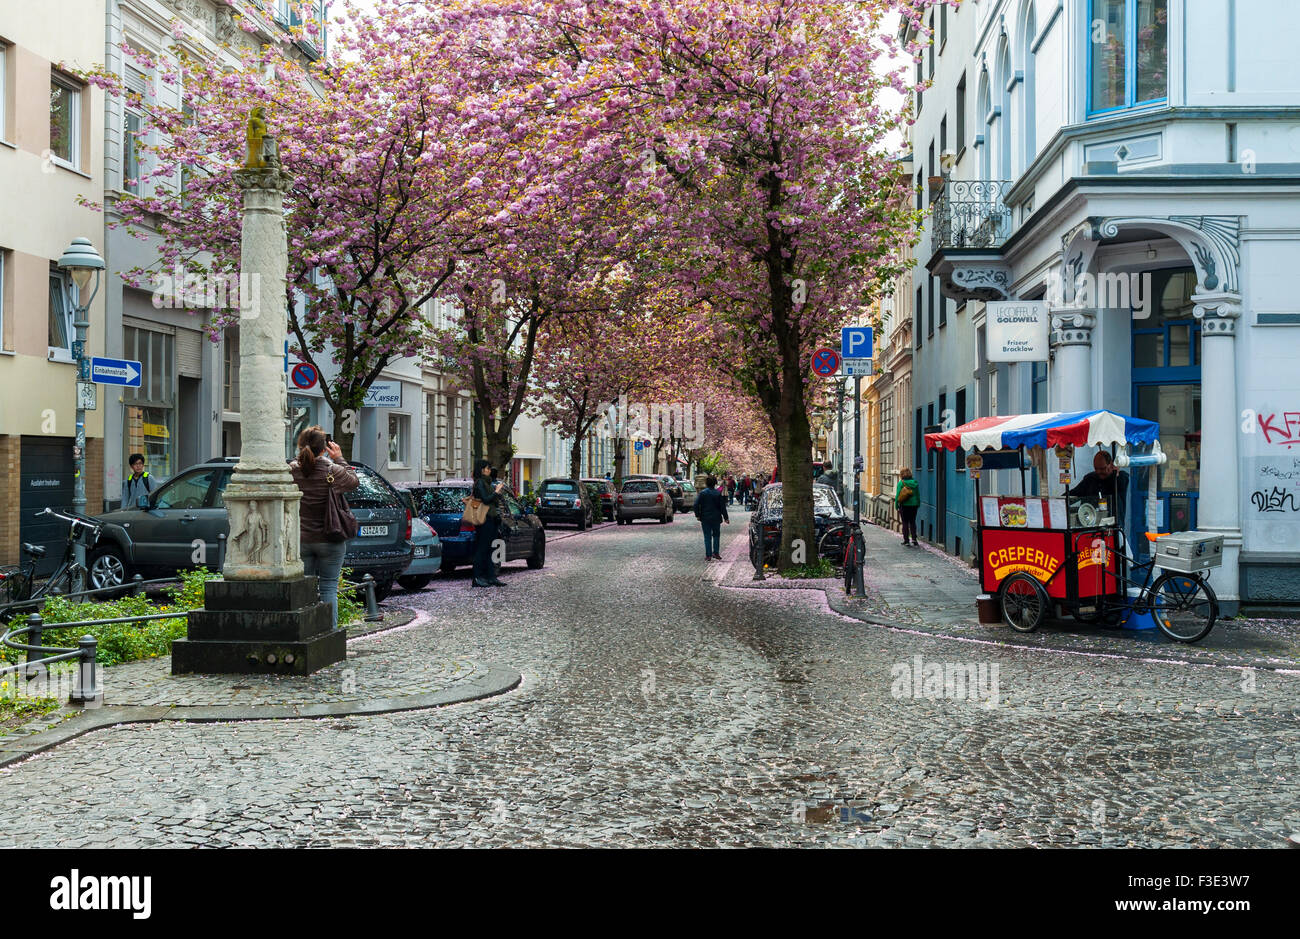 Visitors to Bonn viewing the cherry blossoms in the old town, Germany. Stock Photo